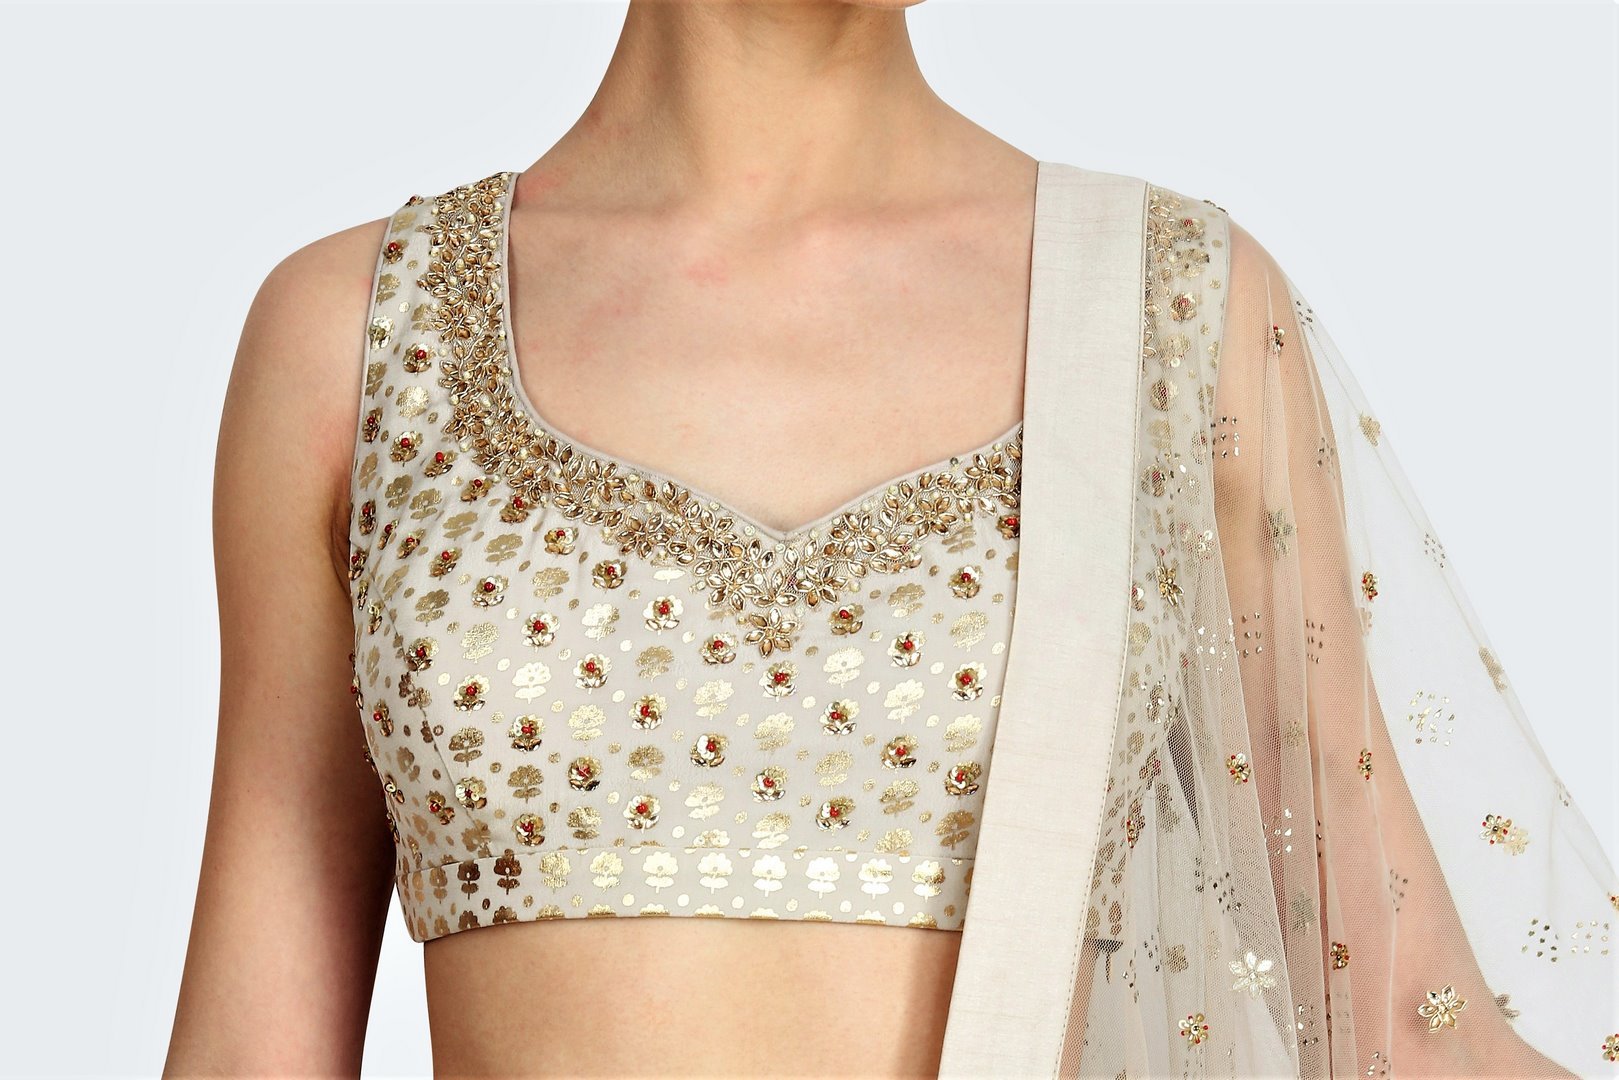 Shop off-white foil print lehenga online in USA with mukesh net dupatta. For more such gorgeous designer lehengas, shop at Pure Elegance Indian fashion store in USA. A beautiful range of traditional sarees and clothing is available for Indian women living in USA. You can also shop at our online store.-blouse